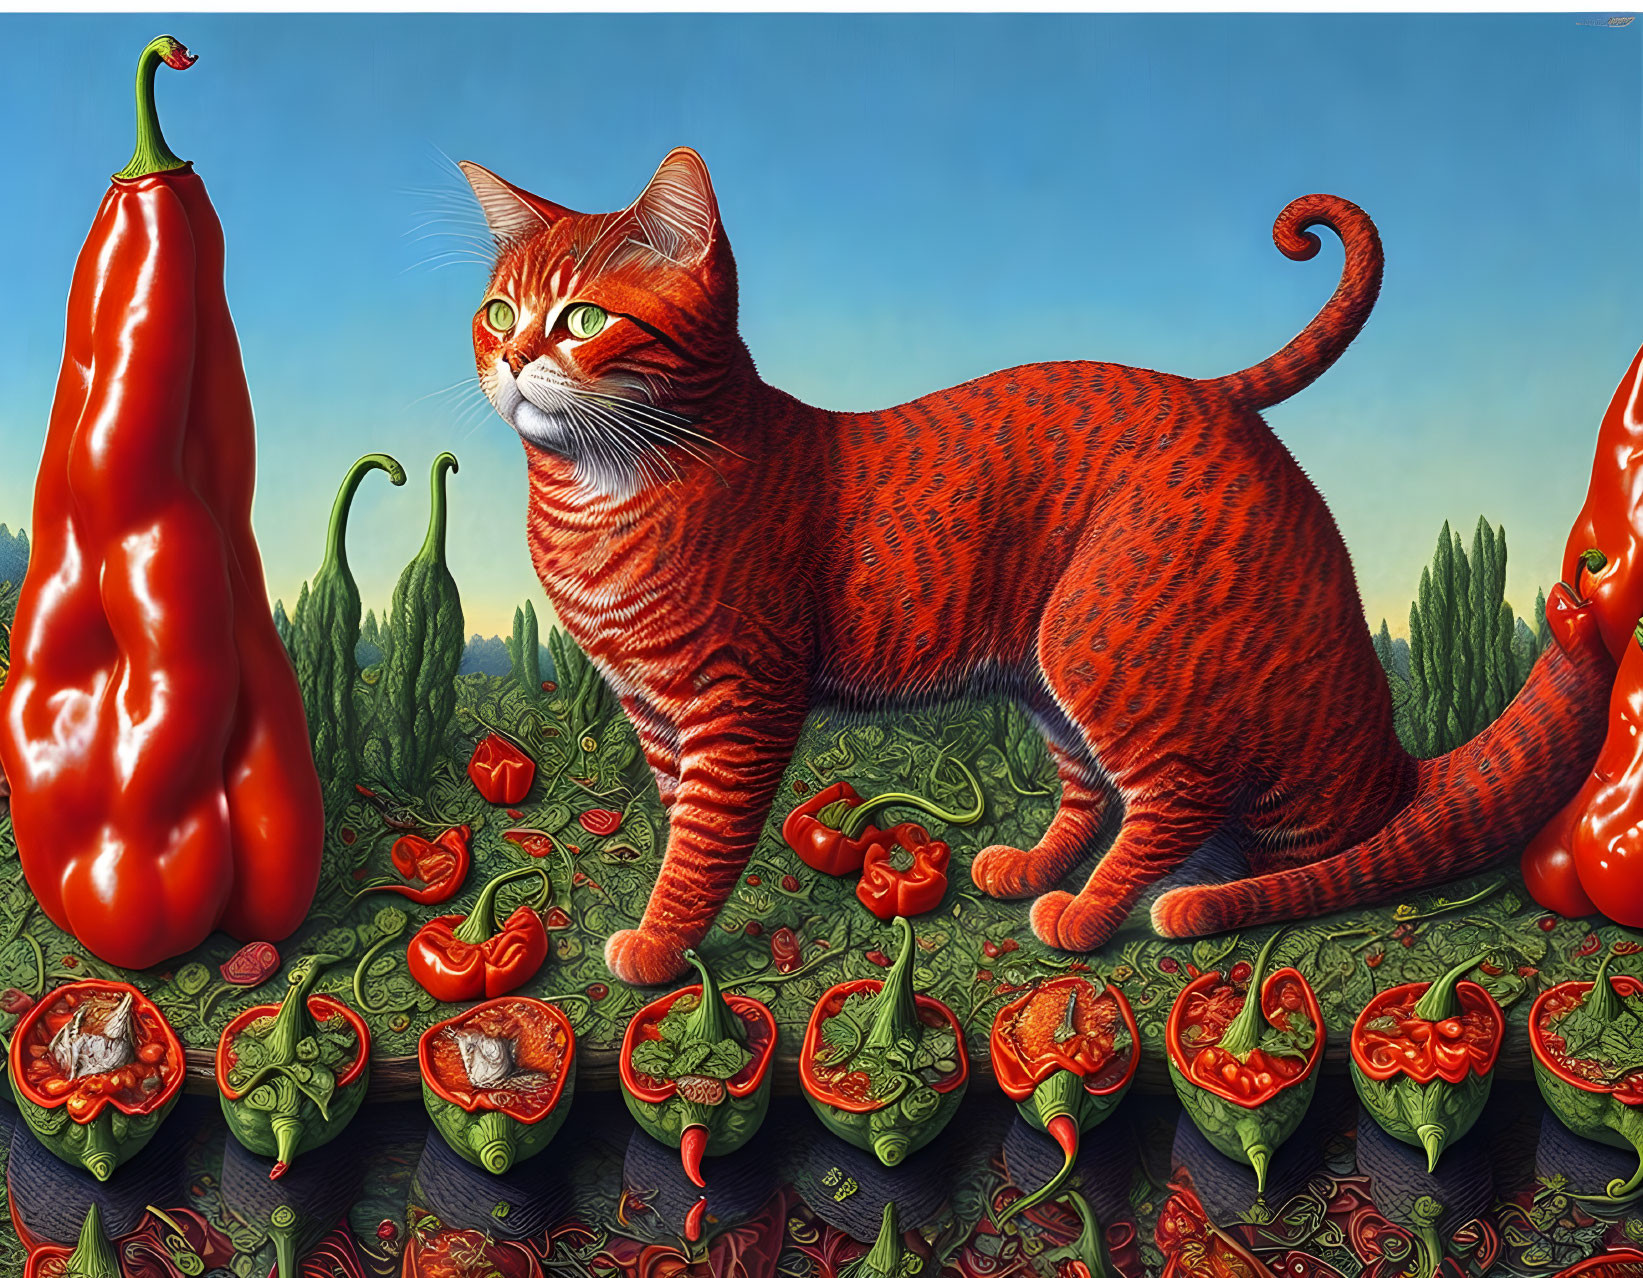 Red pepper cat. extreme details, full front view l